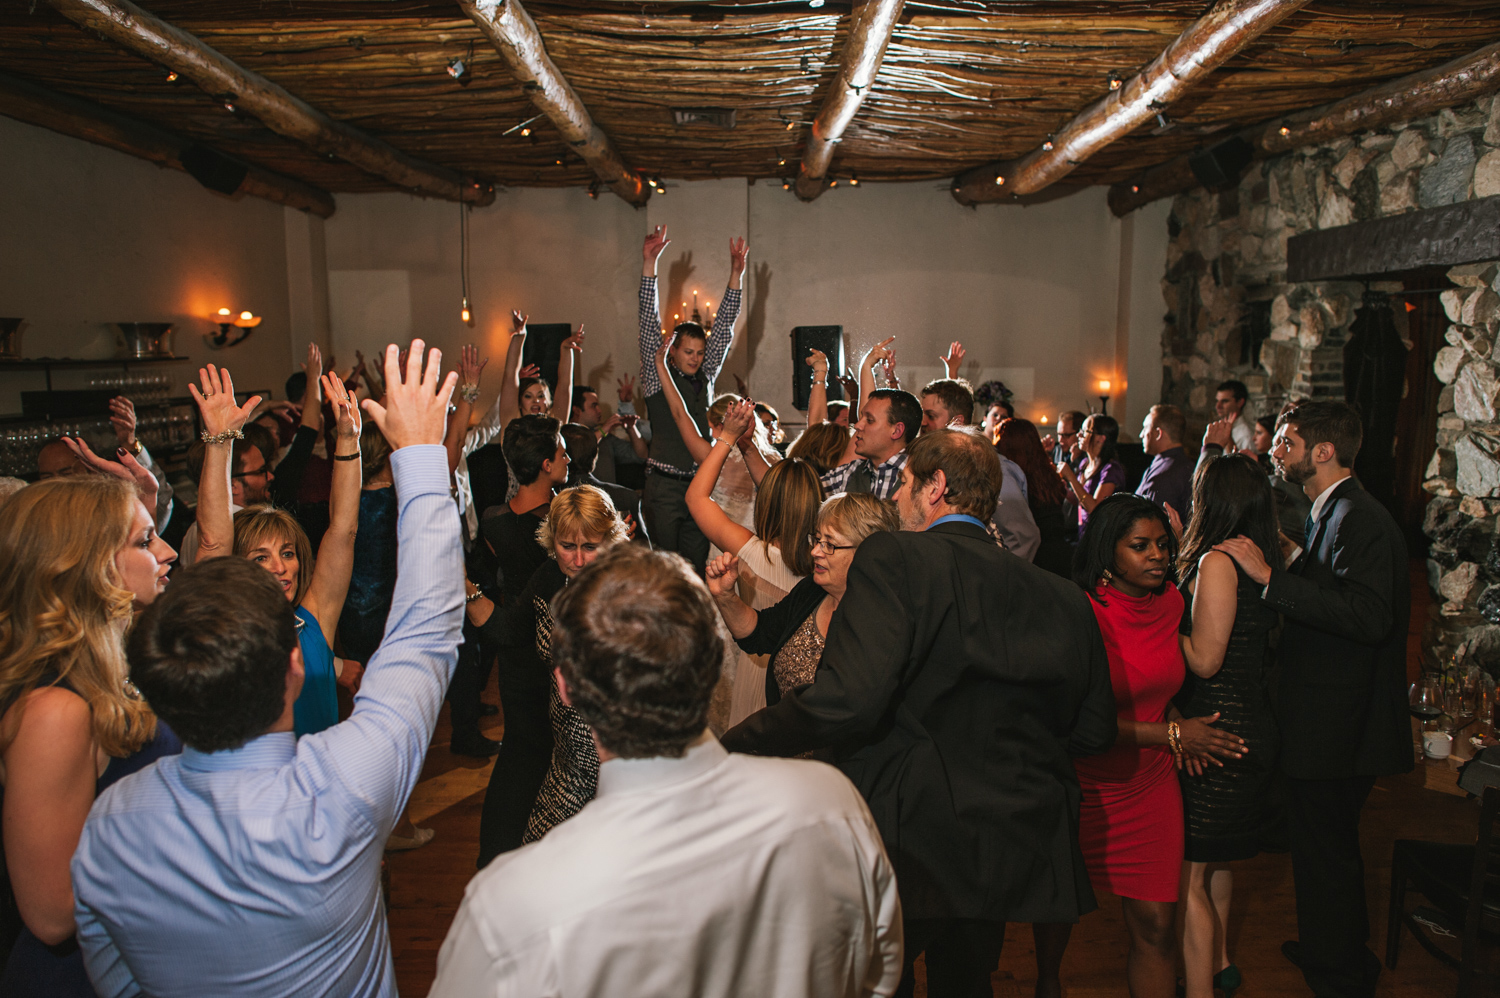 Wedding guests celebrate during wedding reception in dining room at Osteria Via Stato.